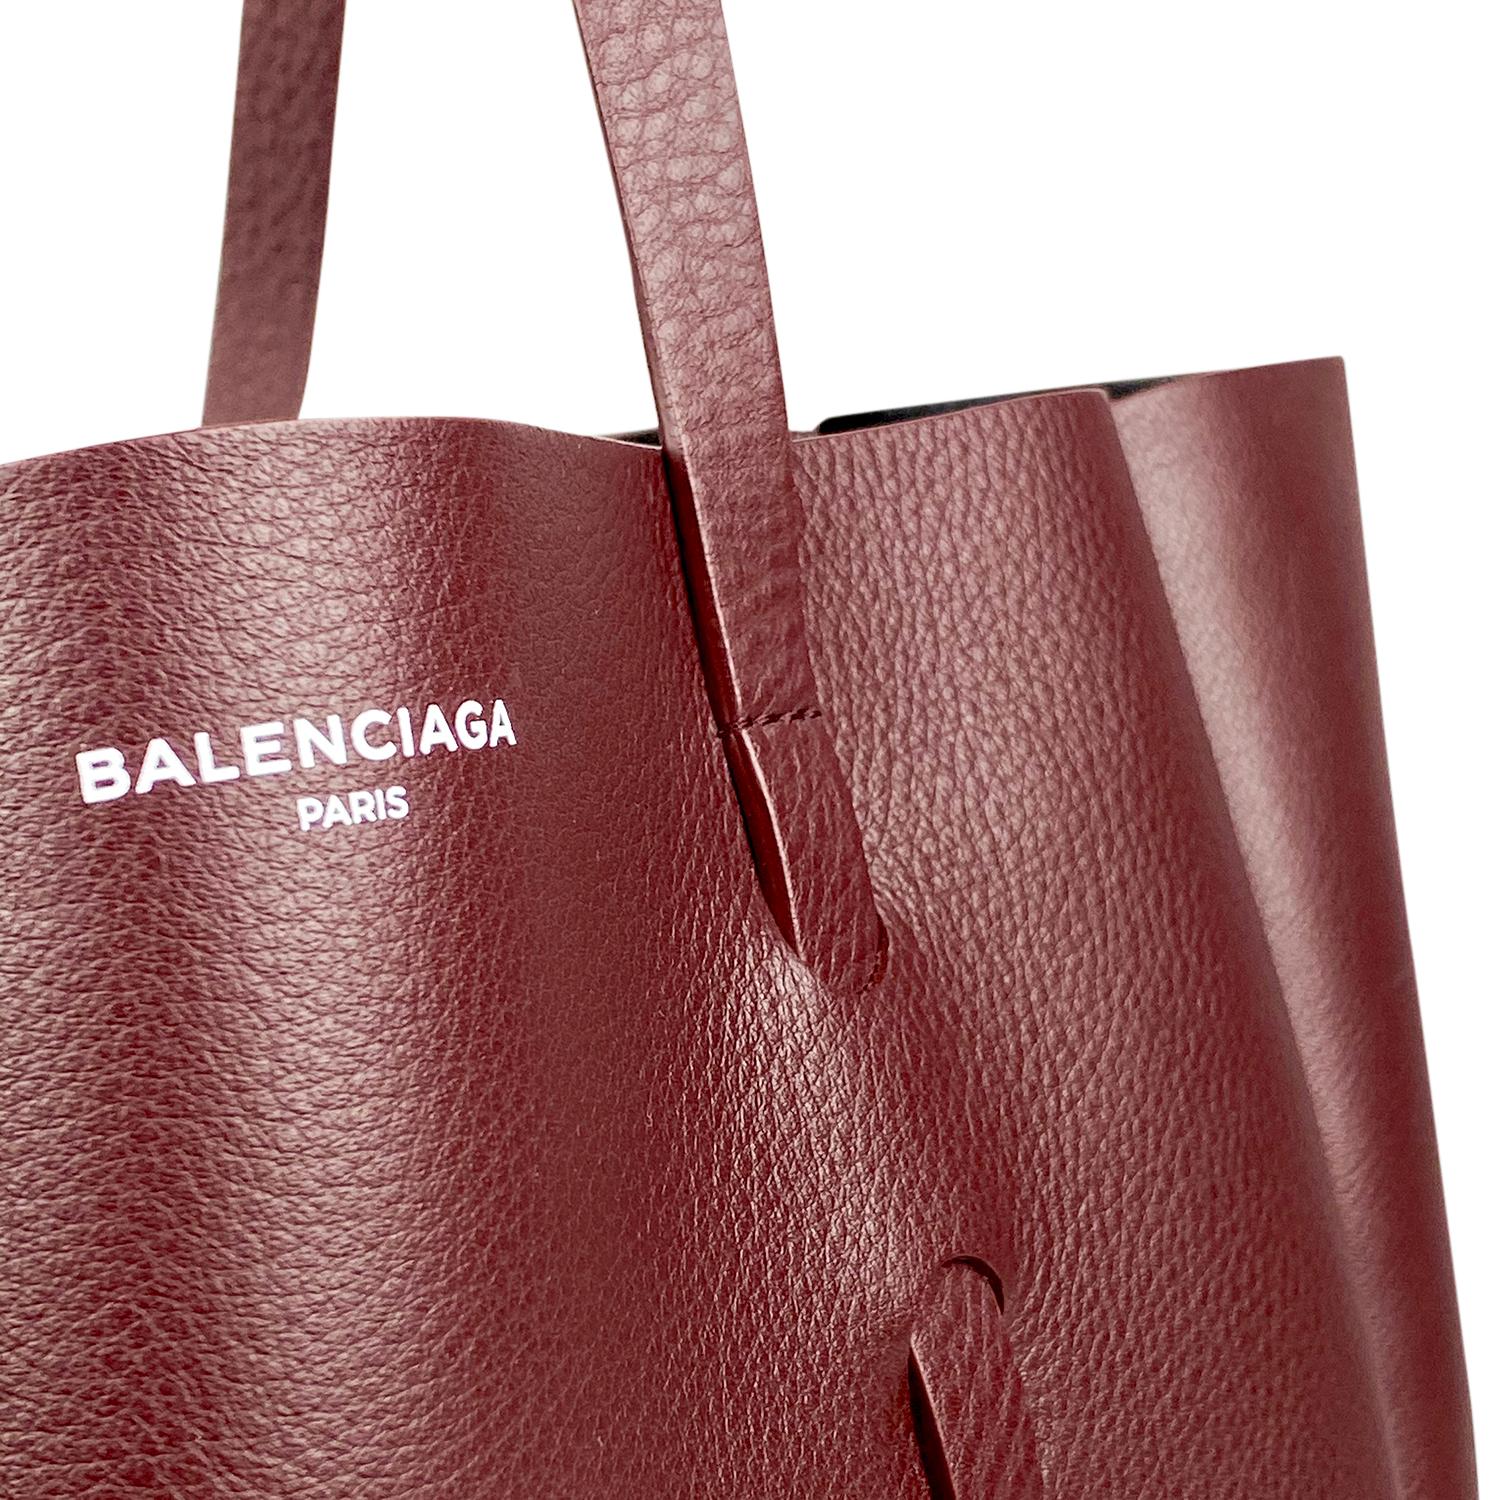 Balenciaga Everyday Tote M Bag In Excellent Condition For Sale In Sundbyberg, SE